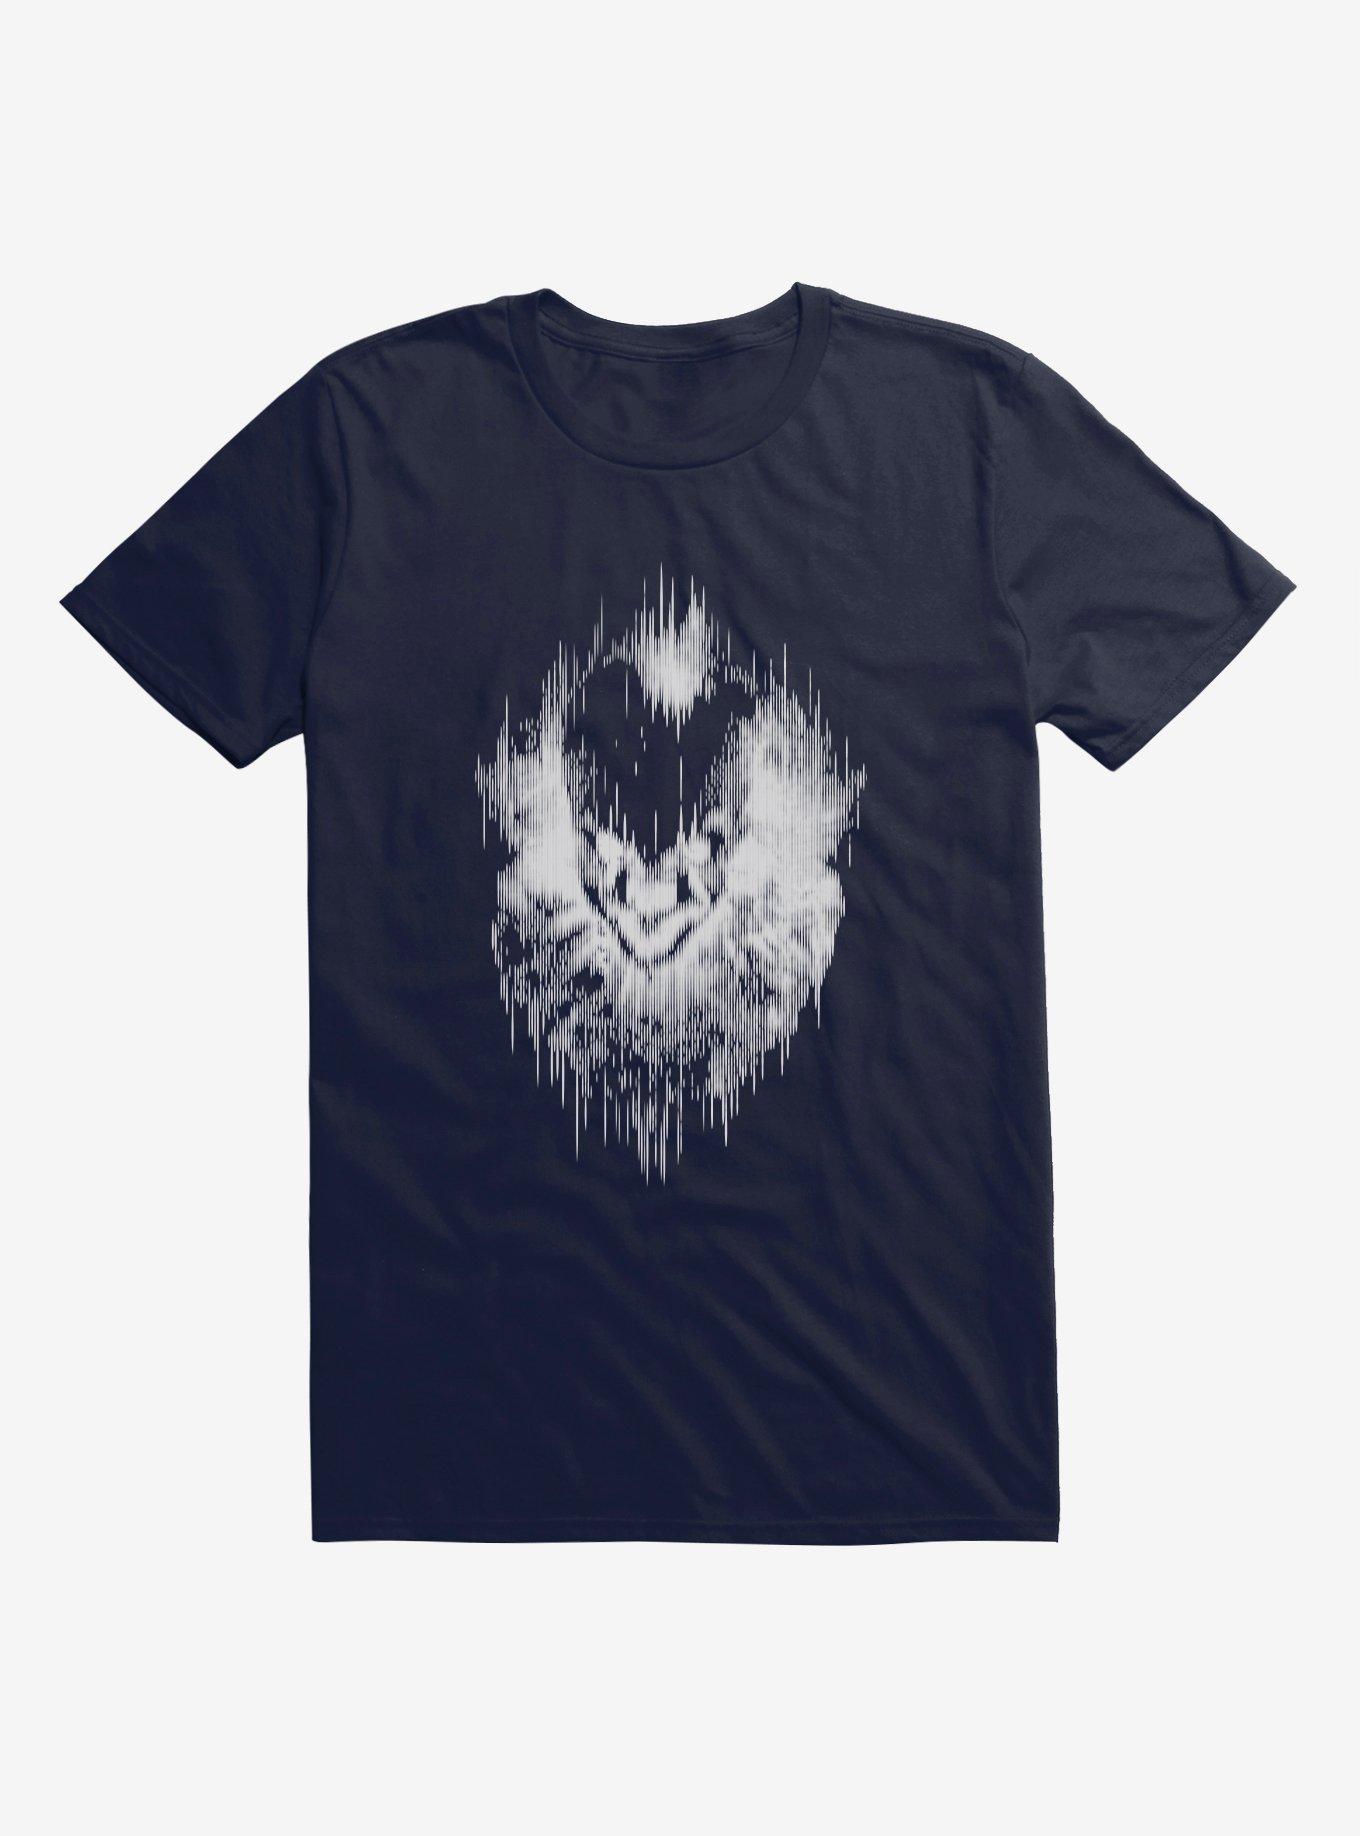 IT Chapter Two Pennywise Static Outline T-Shirt, NAVY, hi-res